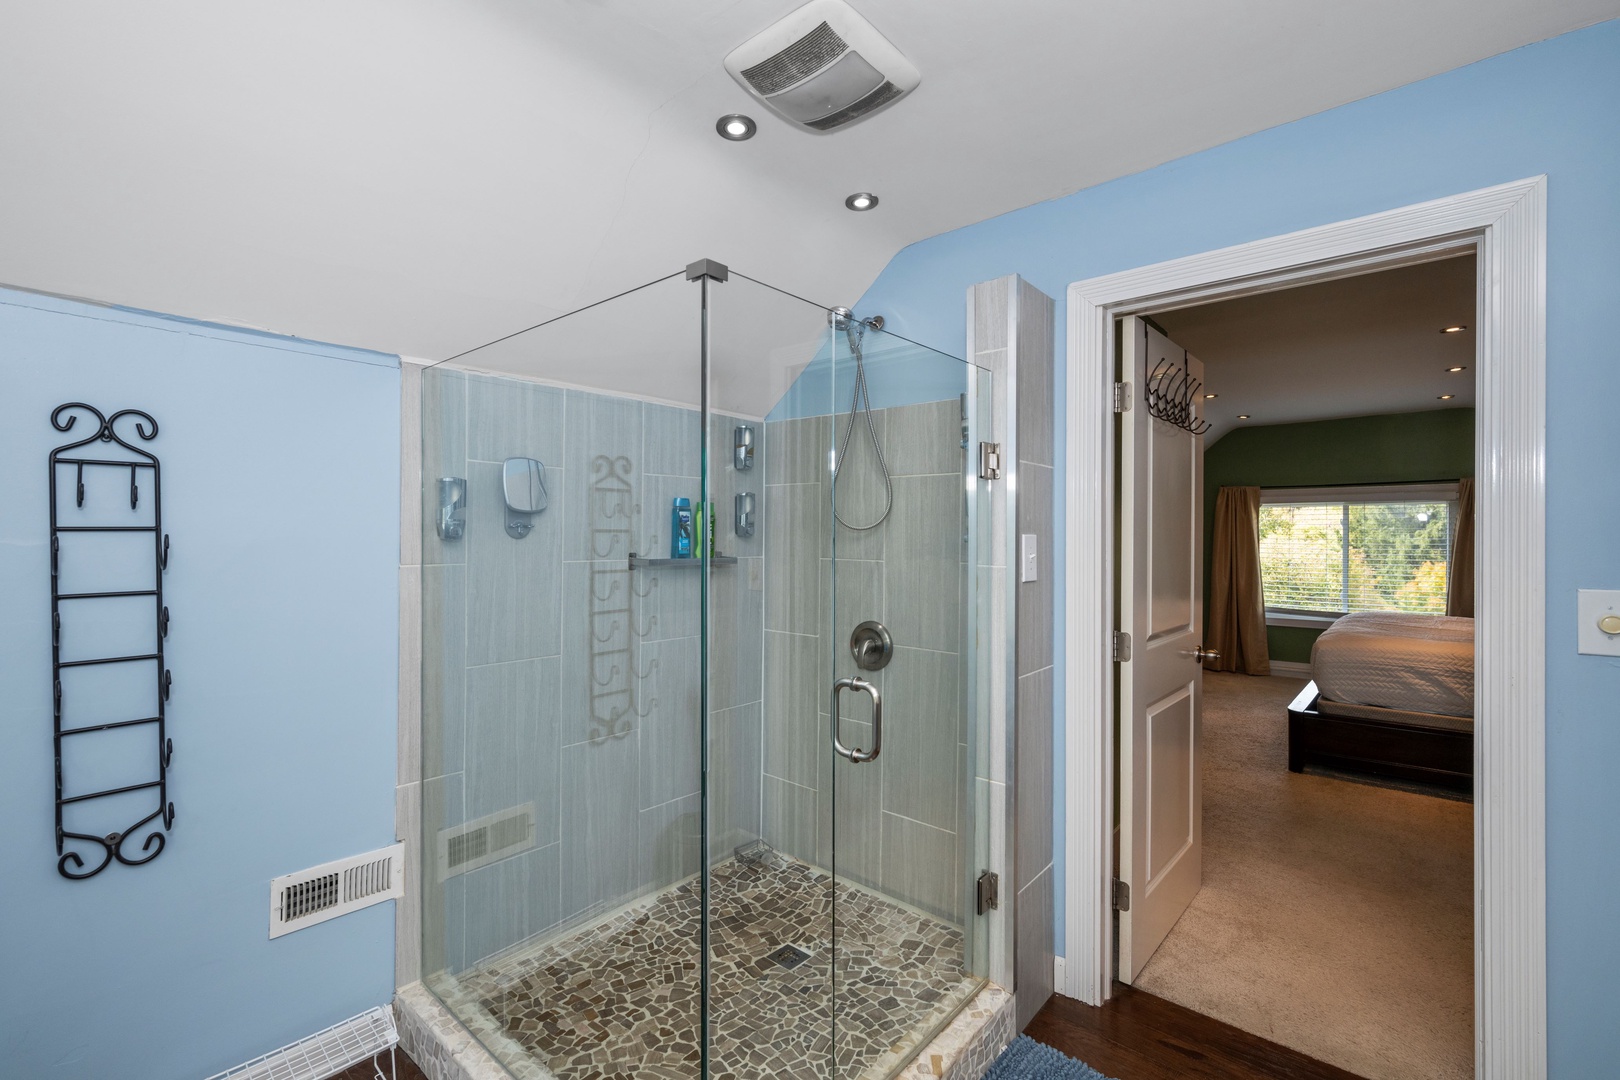 The third-floor en suite offers a double vanity & large, spa-like glass shower